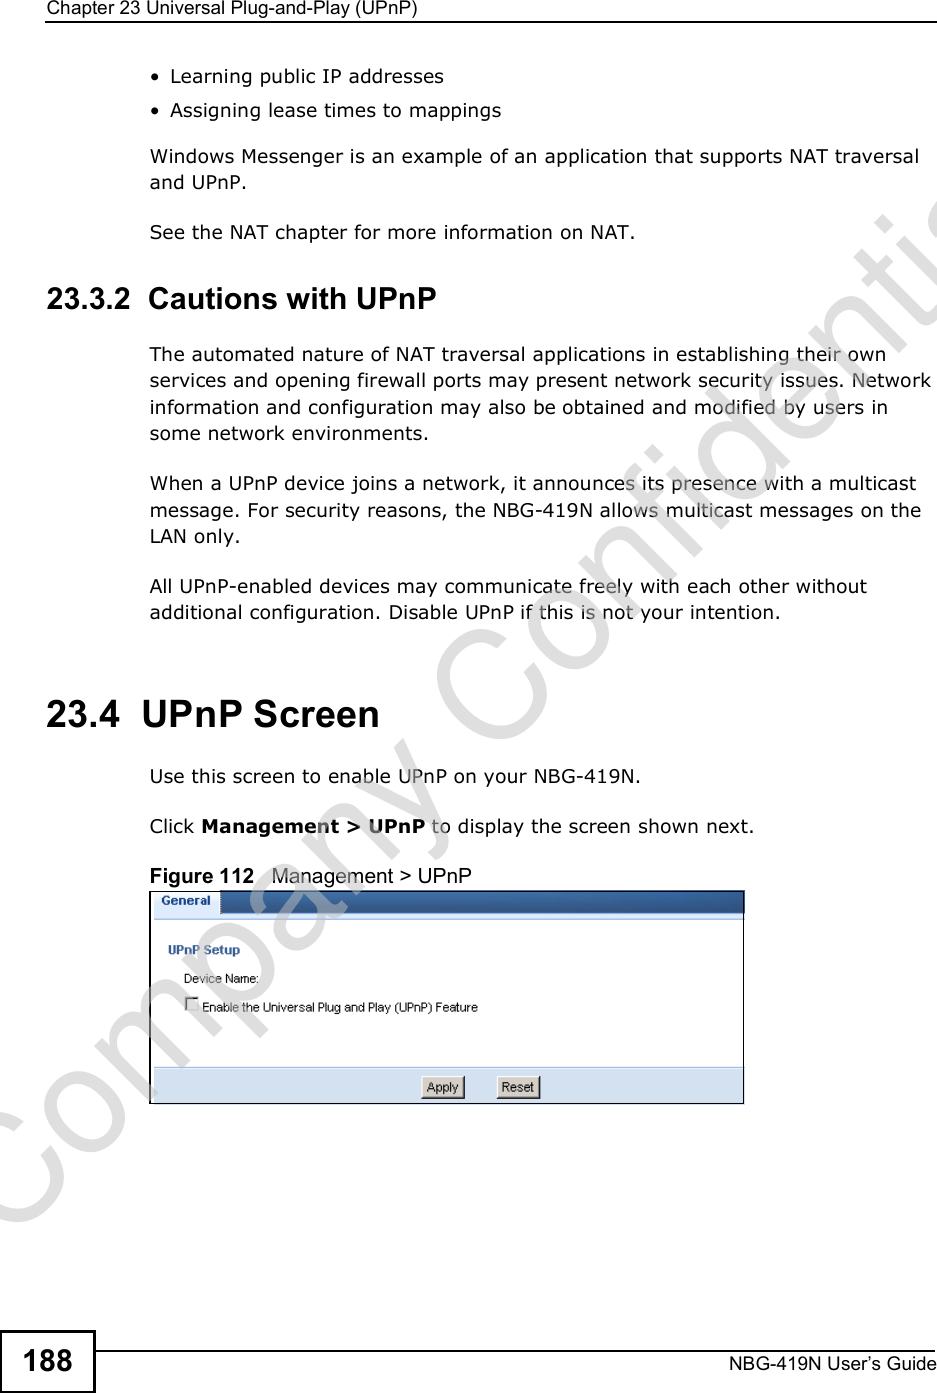 Chapter 23Universal Plug-and-Play (UPnP)NBG-419N User s Guide188 Learning public IP addresses Assigning lease times to mappingsWindows Messenger is an example of an application that supports NAT traversal and UPnP. See the NAT chapter for more information on NAT.23.3.2  Cautions with UPnPThe automated nature of NAT traversal applications in establishing their own services and opening firewall ports may present network security issues. Network information and configuration may also be obtained and modified by users in some network environments. When a UPnP device joins a network, it announces its presence with a multicast message. For security reasons, the NBG-419N allows multicast messages on the LAN only.All UPnP-enabled devices may communicate freely with each other without additional configuration. Disable UPnP if this is not your intention. 23.4  UPnP Screen Use this screen to enable UPnP on your NBG-419N.Click Management &gt; UPnP to display the screen shown next. Figure 112   Management &gt; UPnPCompany Confidential